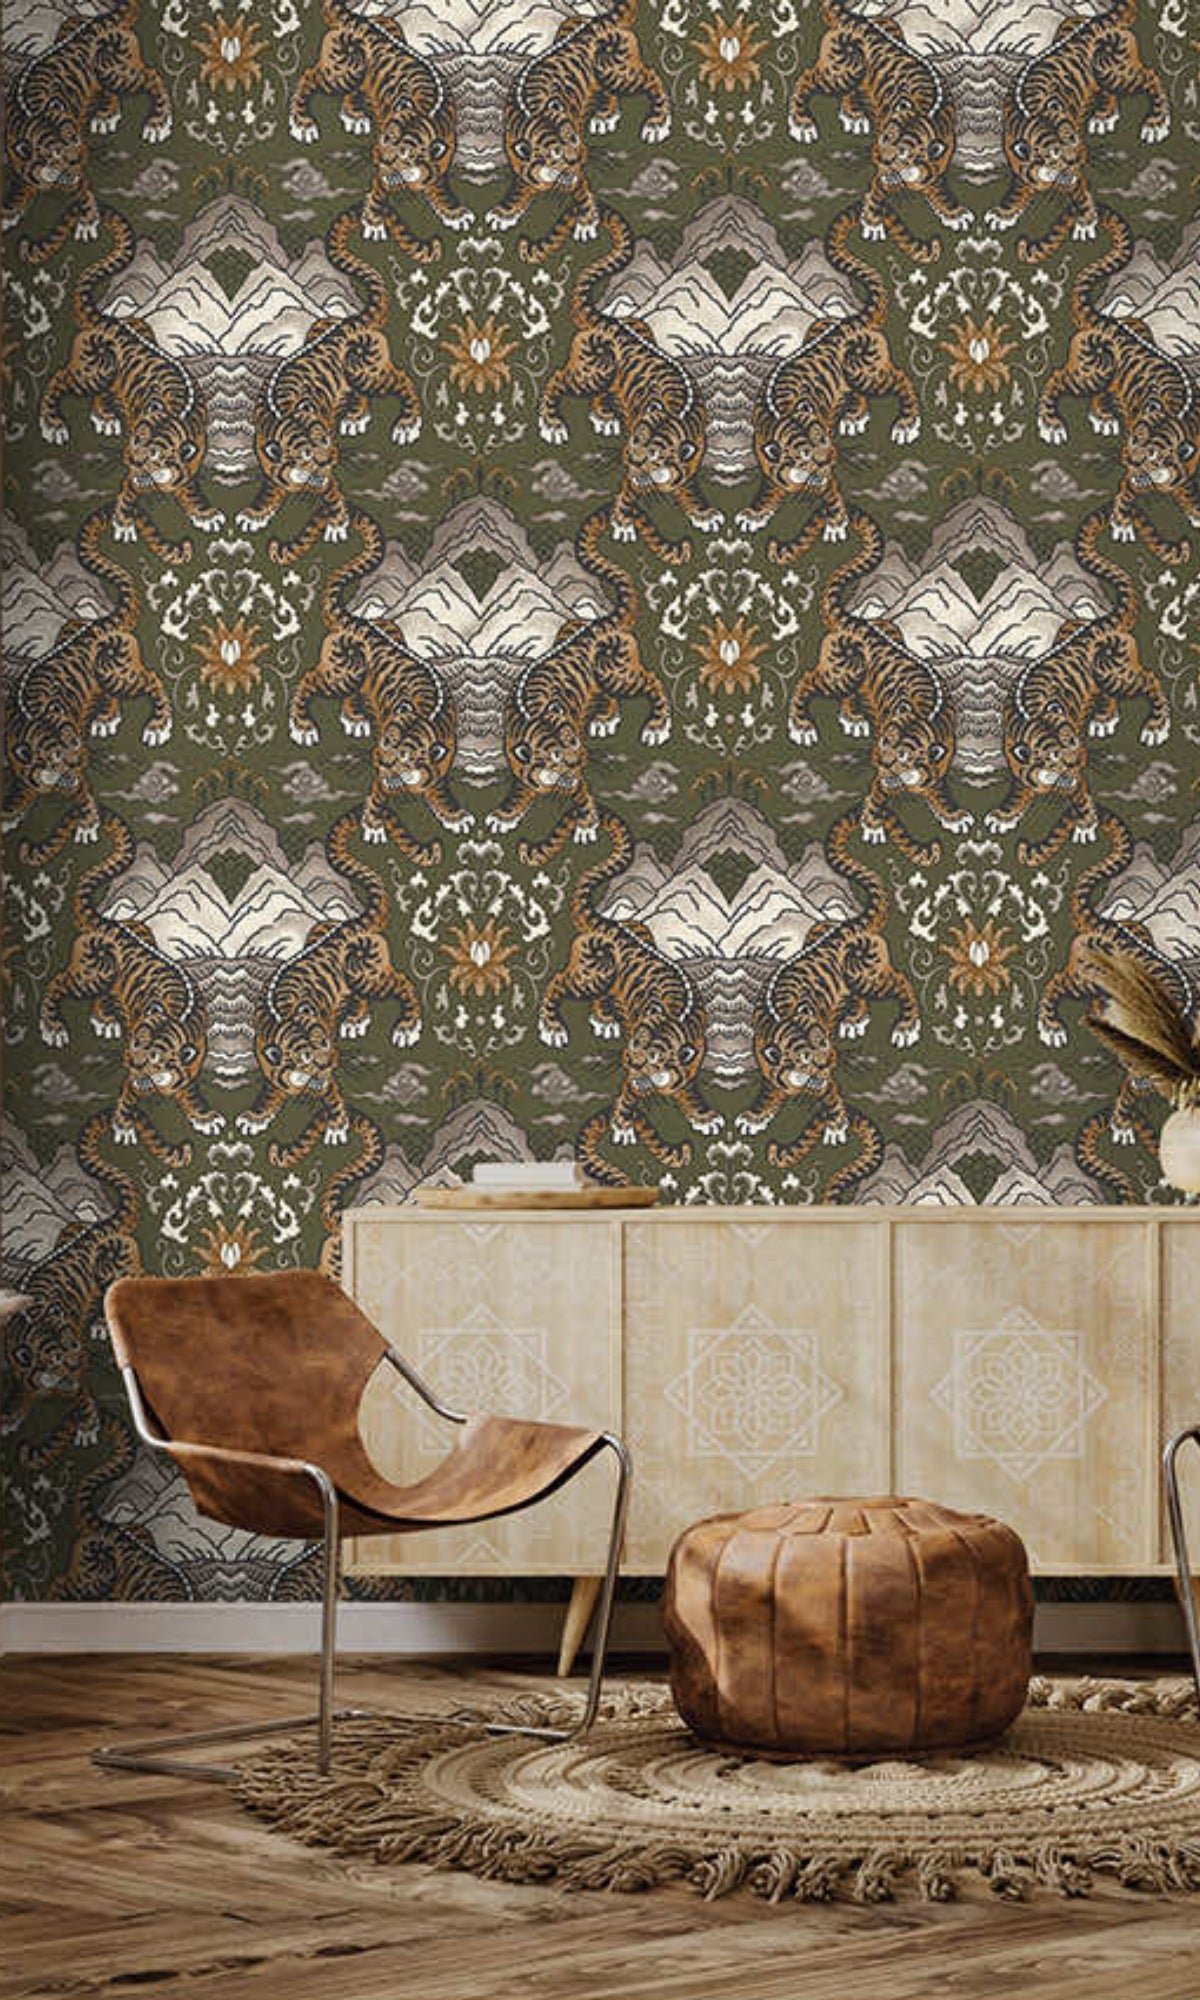 Khaki Tiger Chinese Inspired Textured Wallpaper R8412